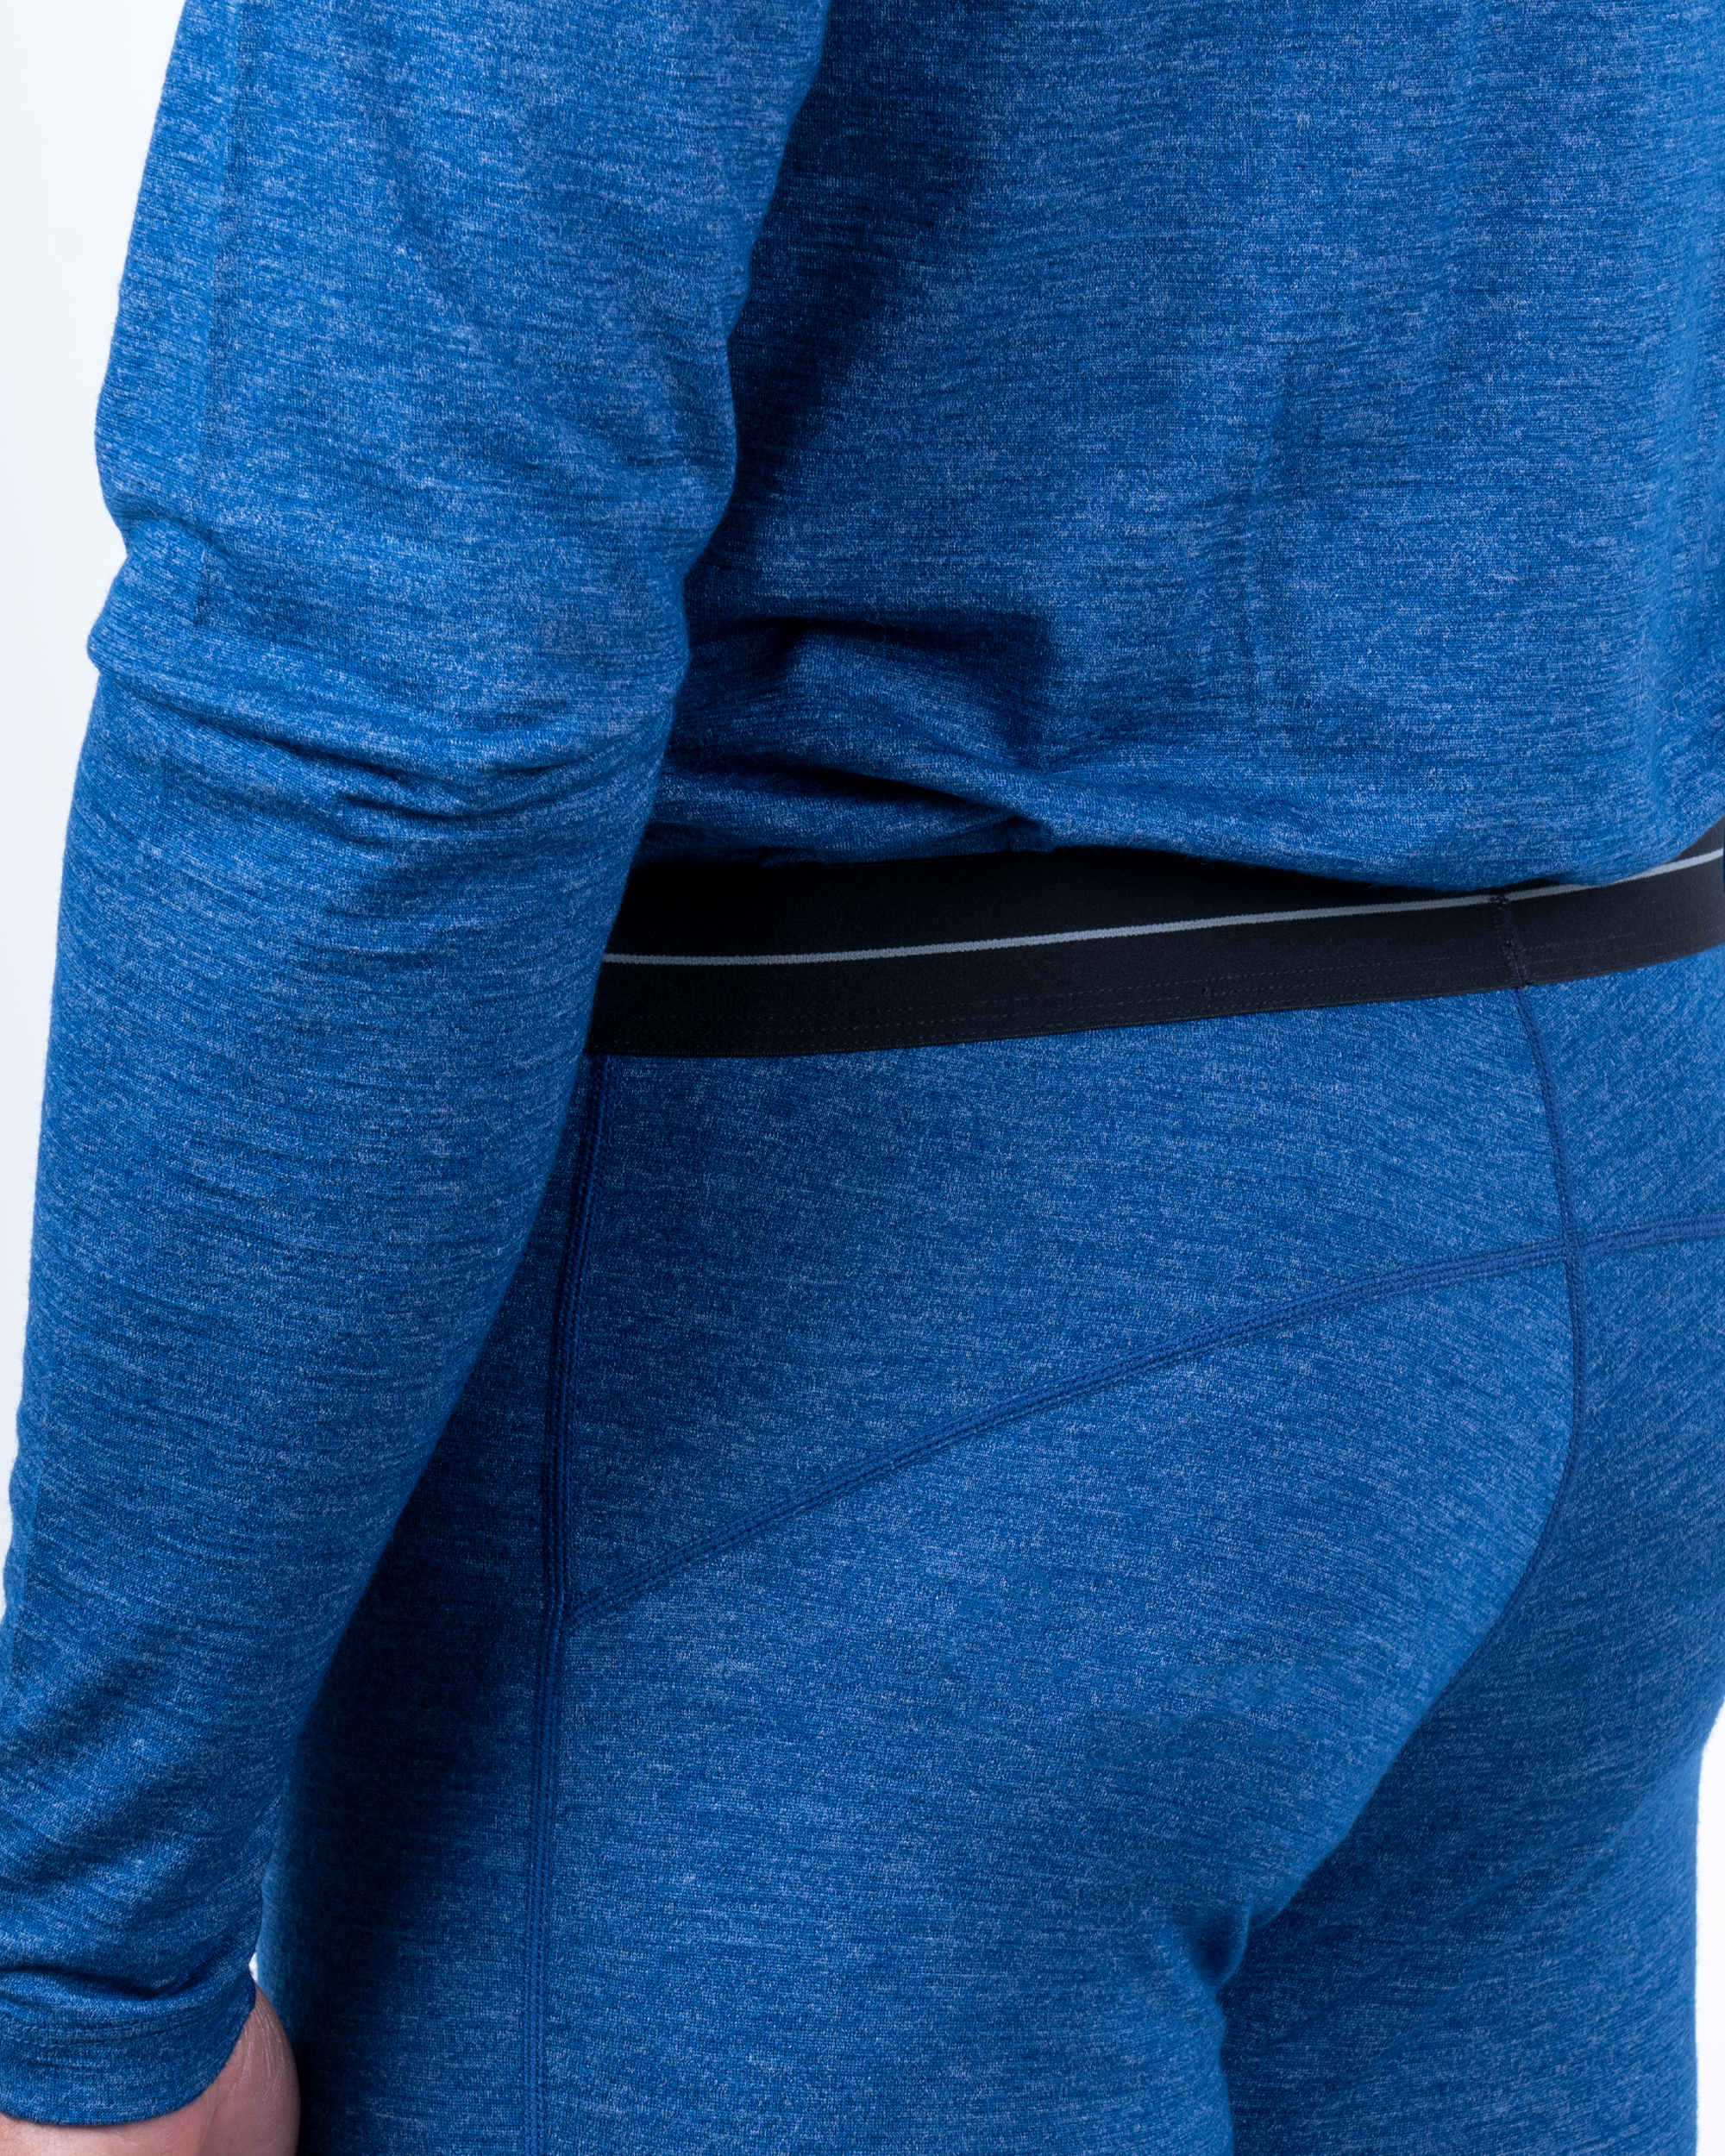 Foreign Rider Co Nuyarn Merino Wool Blue Heather Base Layer Tights Side Bottom Stretch Waistband Close Up